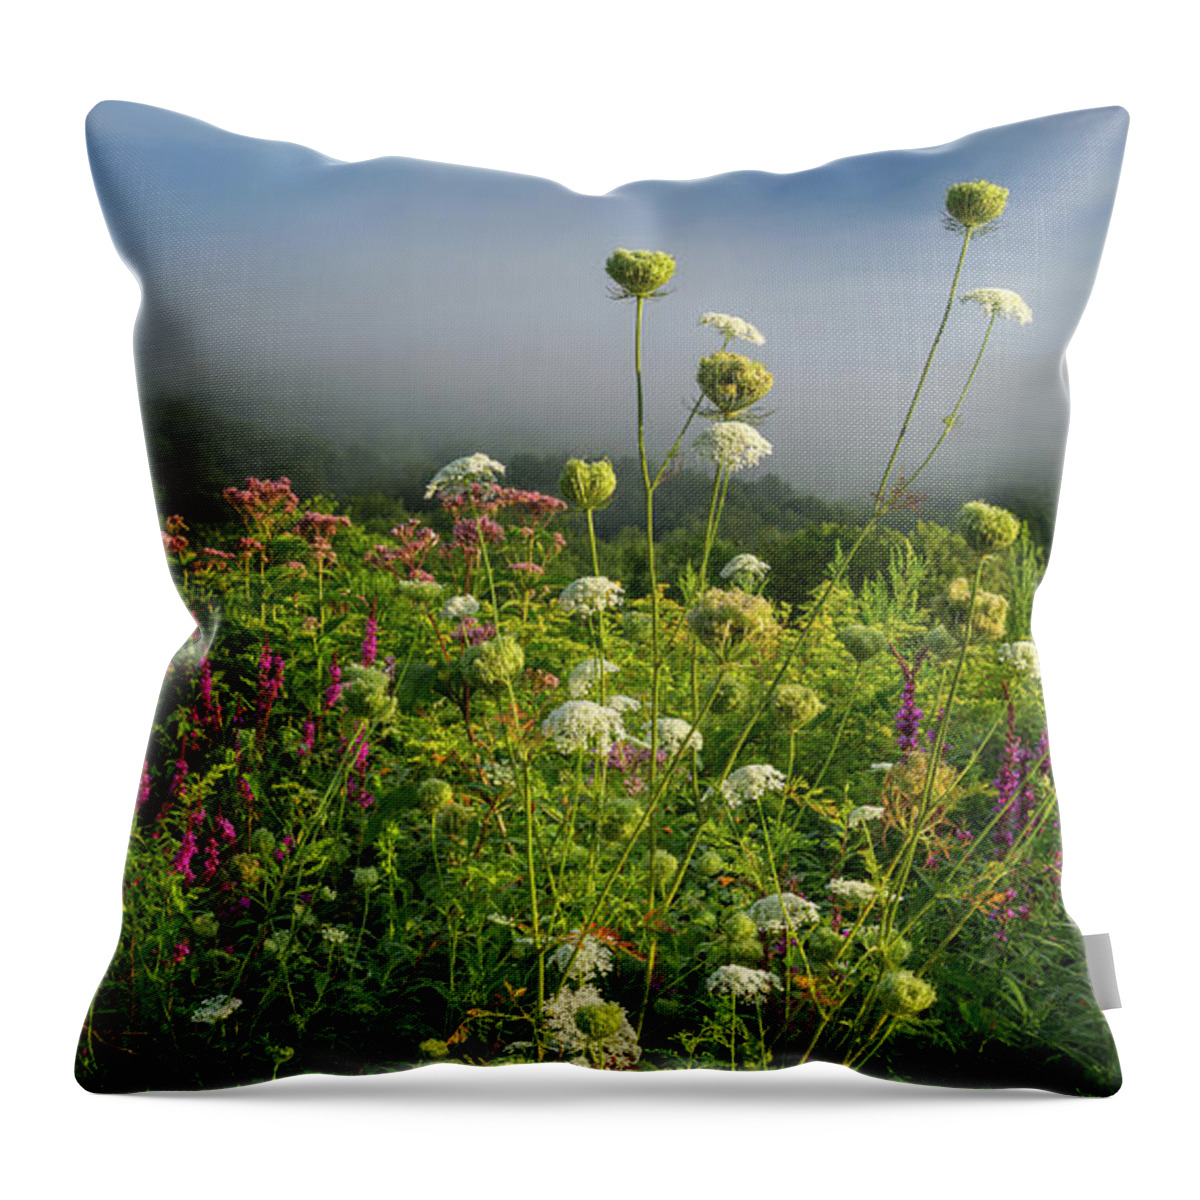 Summer Throw Pillow featuring the photograph Summer Floral by Bill Wakeley